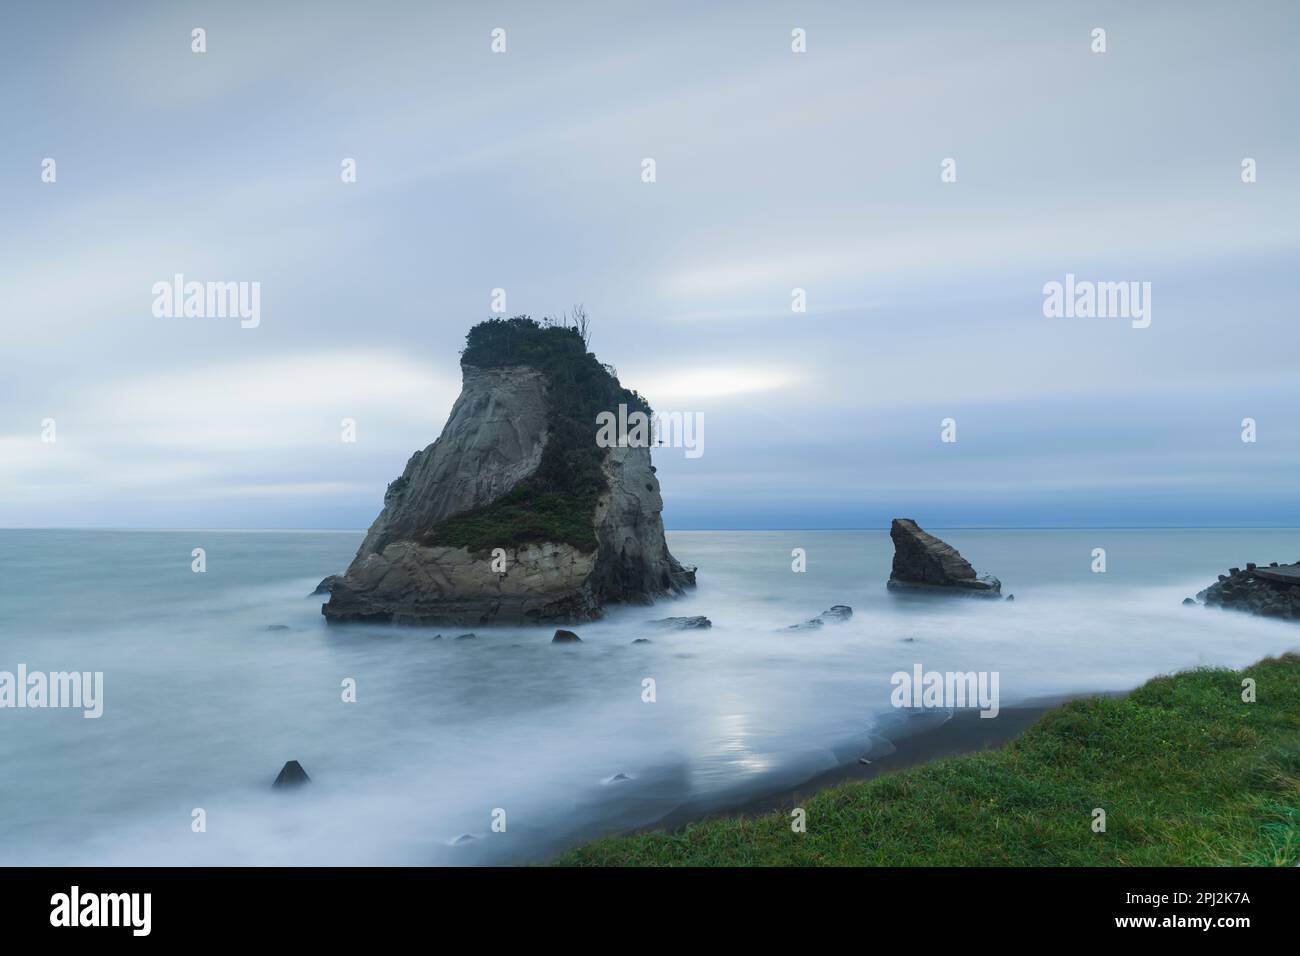 Long exposure shot of sea stacks in the water, Chiba Prefecture, Japan Stock Photo